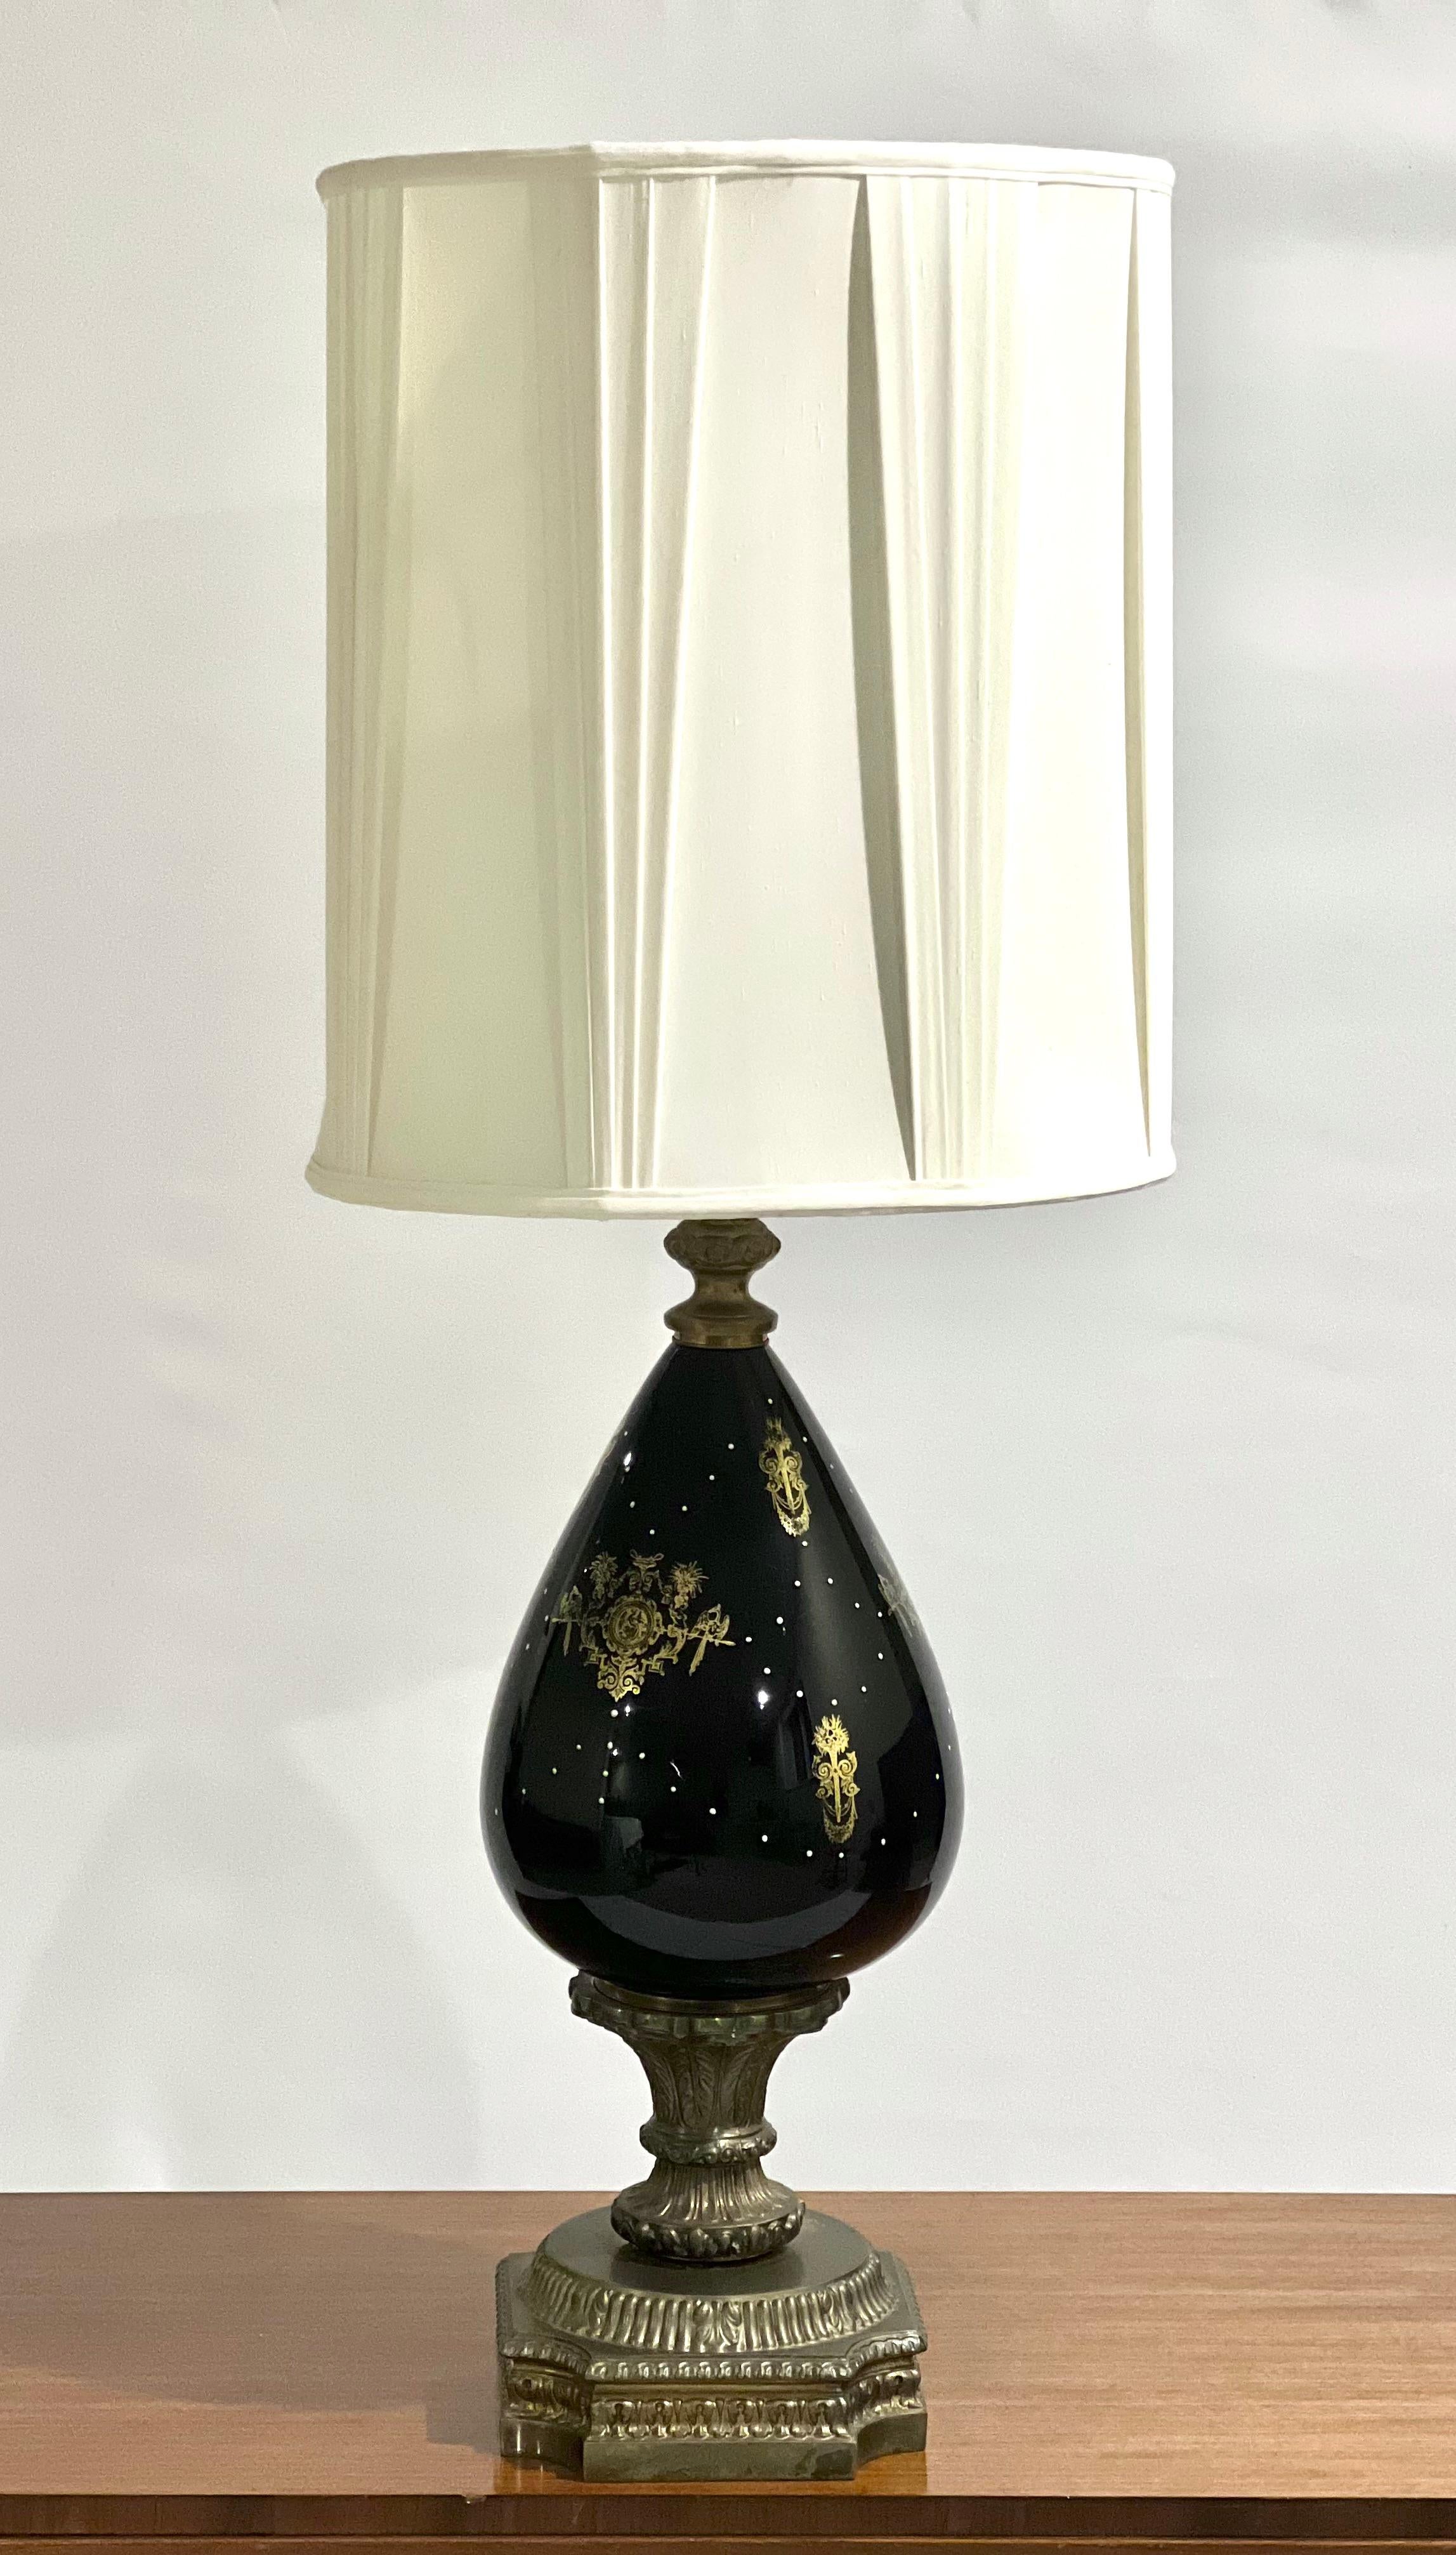 Antique French porcelain and brass table lamp with shade, France circa 1890.

Impressive mirror noir vase lamp with a gilded brass ormolu base and acanthus leaf detail. The body features hand painted gold double griffin heraldic emblems and white